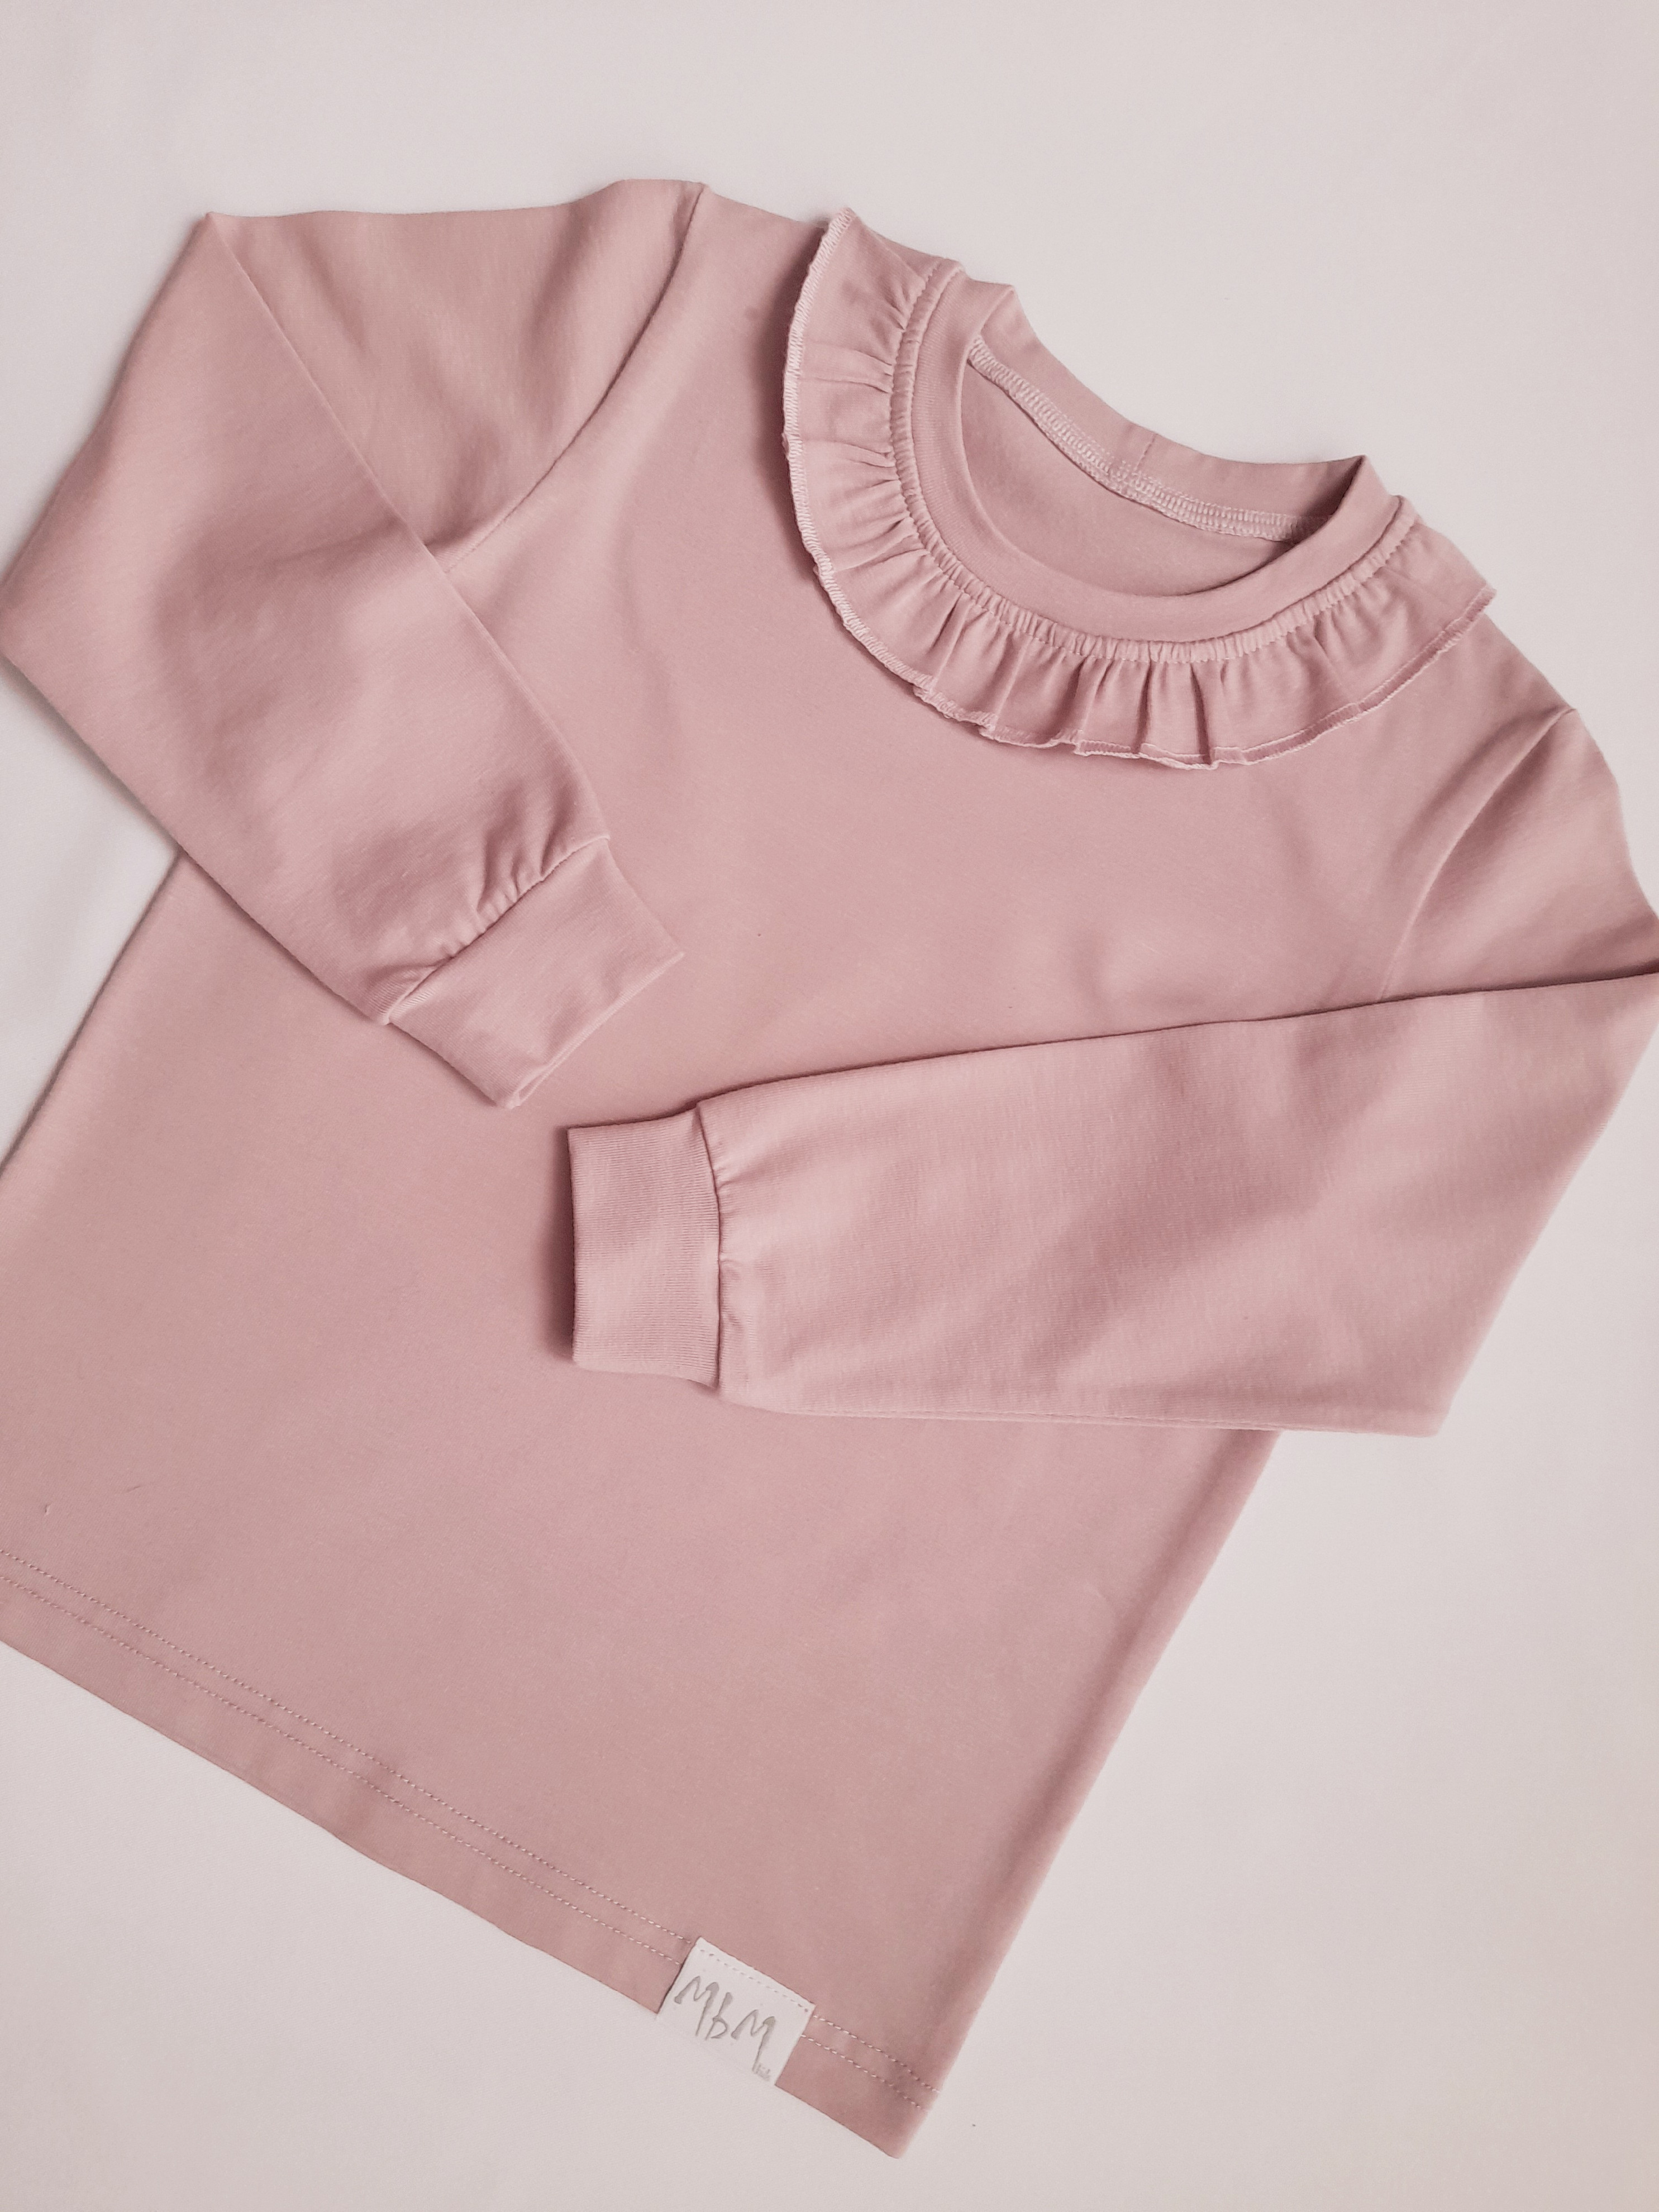 CHILD T-SHIRT DUSTY PINK Velikost: 98